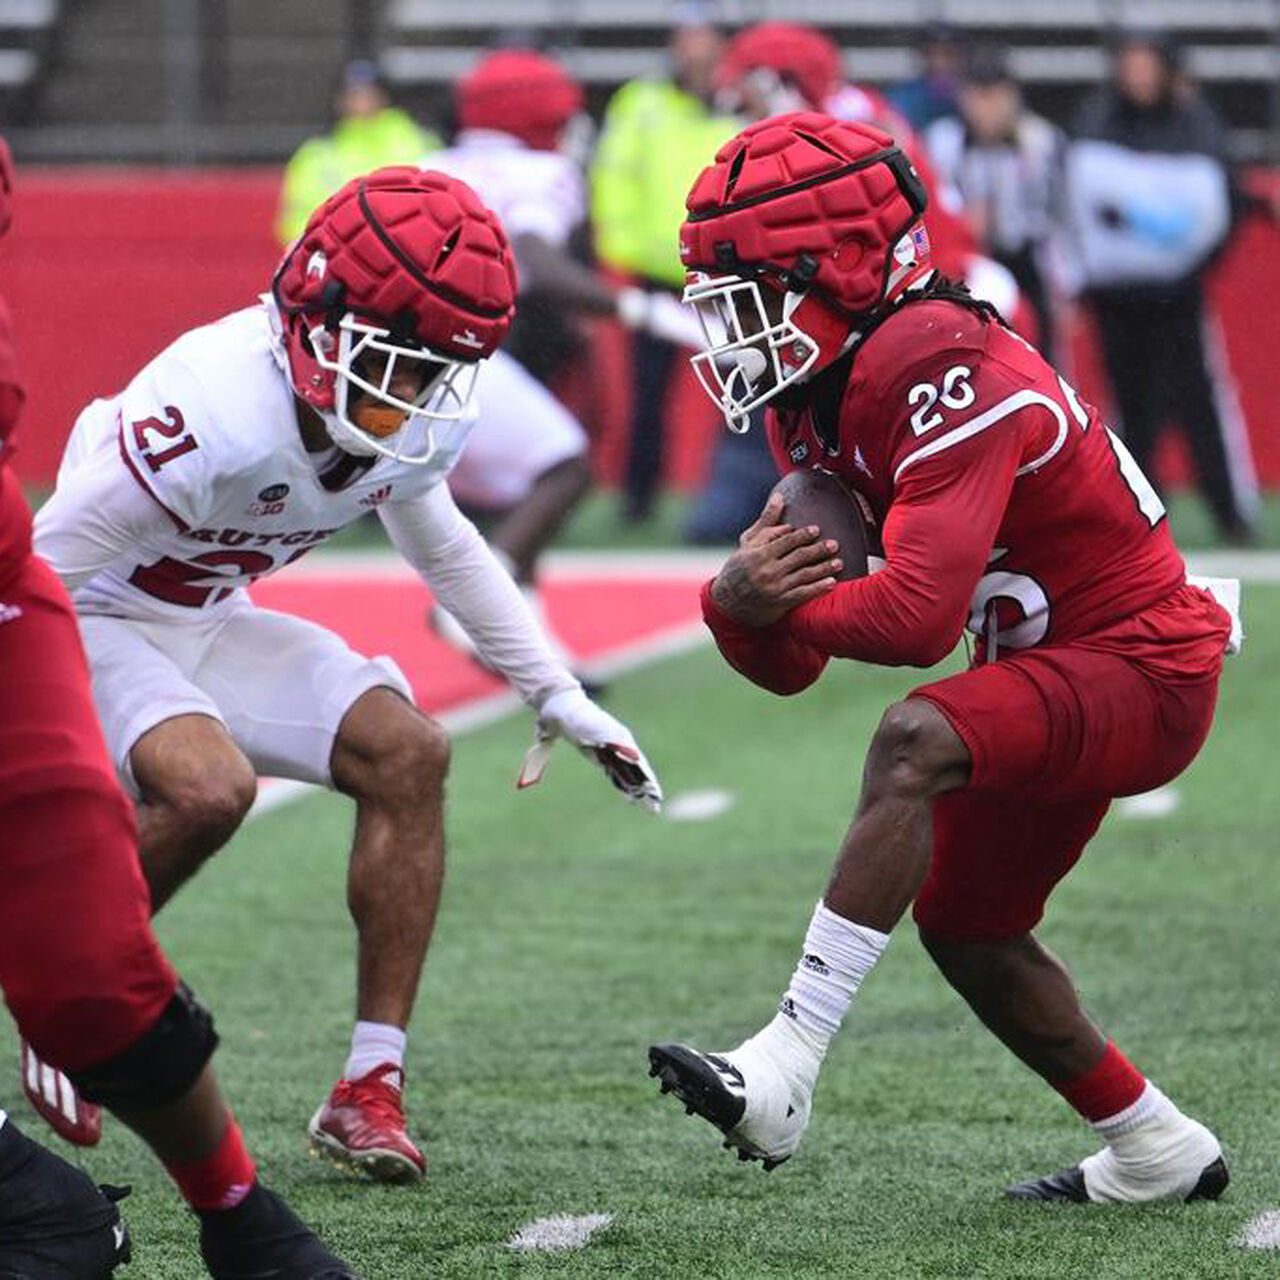 Two Rutgers football team members playing against one another in the annual Spring Game image number 0